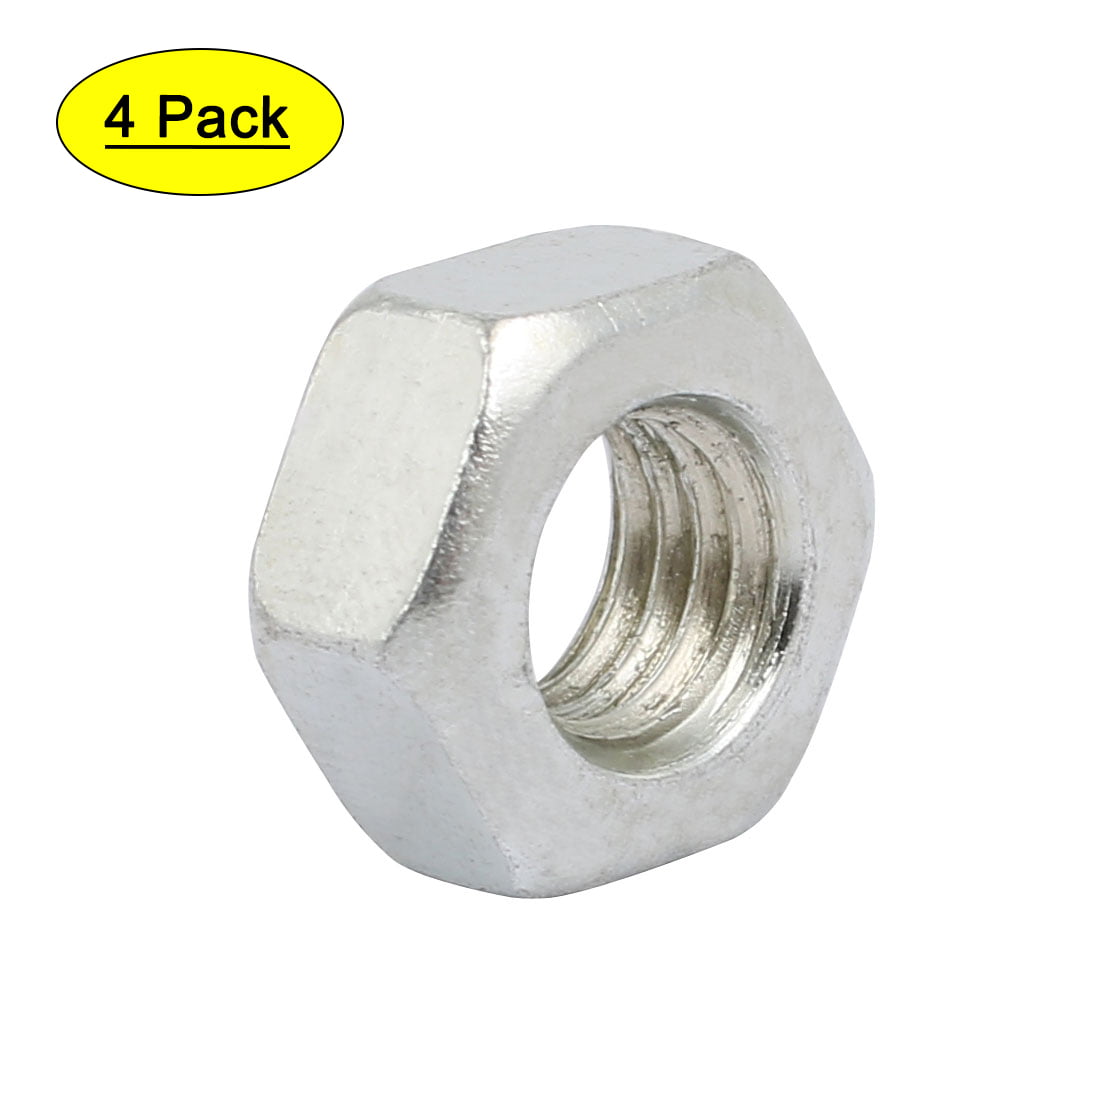 New 2Pcs M16 x 2 Metric Left Hand Thread Stainless Steel Hex Nut M1 